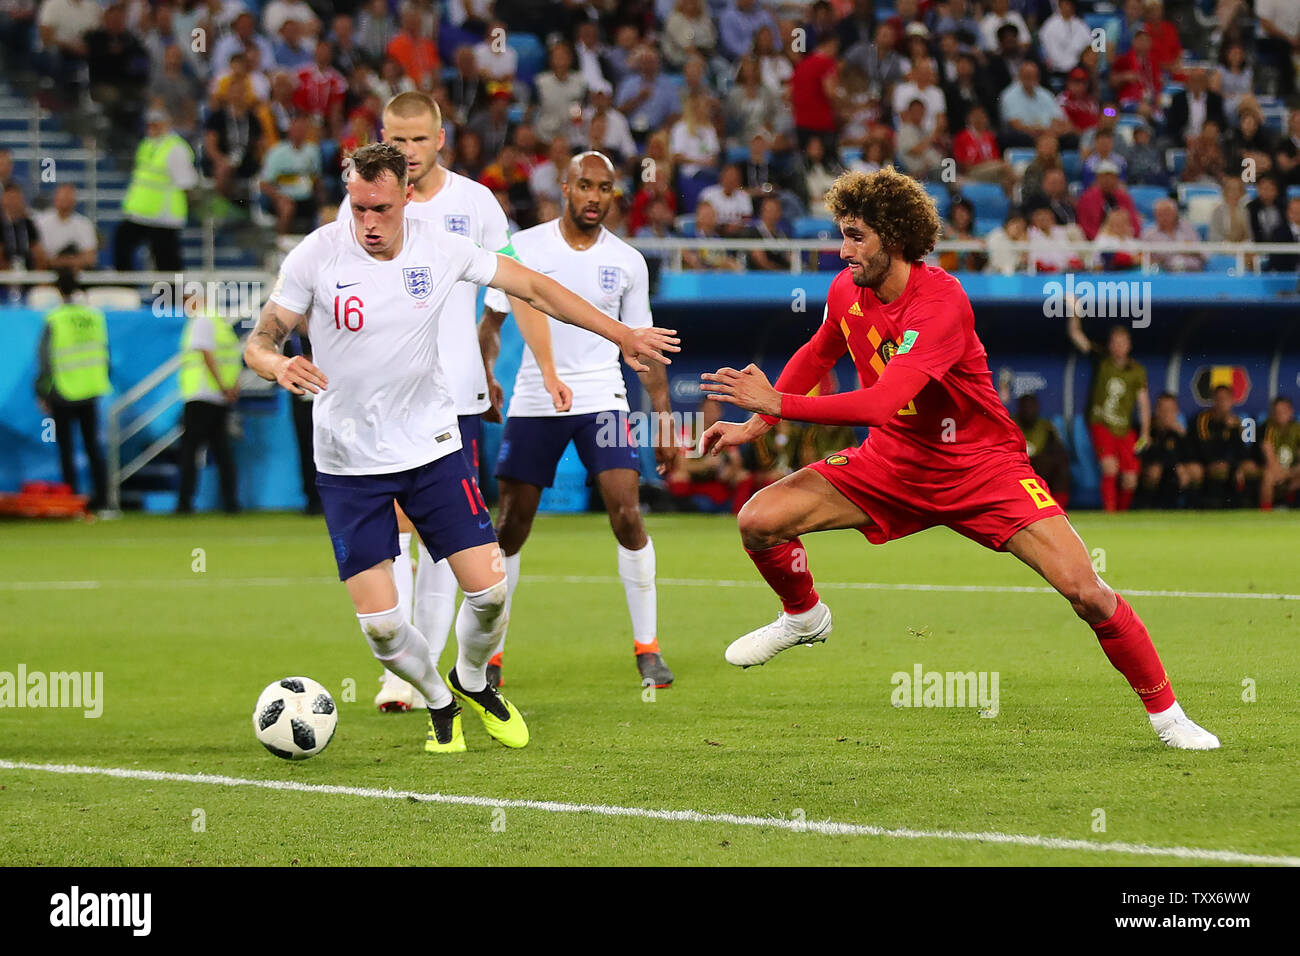 Phil Jones (L) of England competes for the ball with Marouane Fellaini of Belgium during the 2018 FIFA World Cup Group G match at Kaliningrad Stadium in Kaliningrad, Russia on June 28, 2018. Belgium won the match 1-0. Photo by Chris Brunskill/UPI Stock Photo